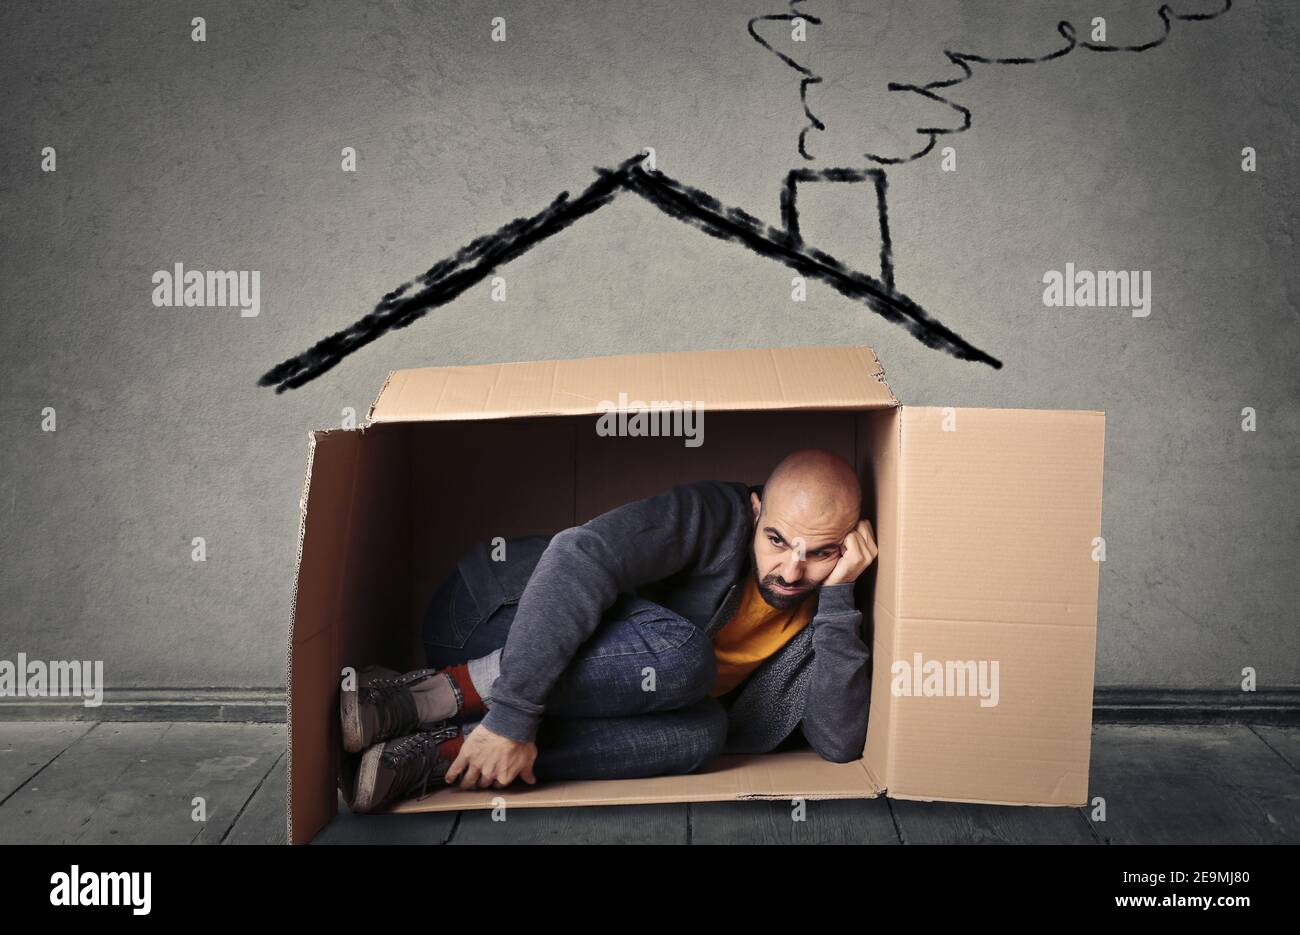 European male sitting in a cardboard box with a house drawn o Stock Photo